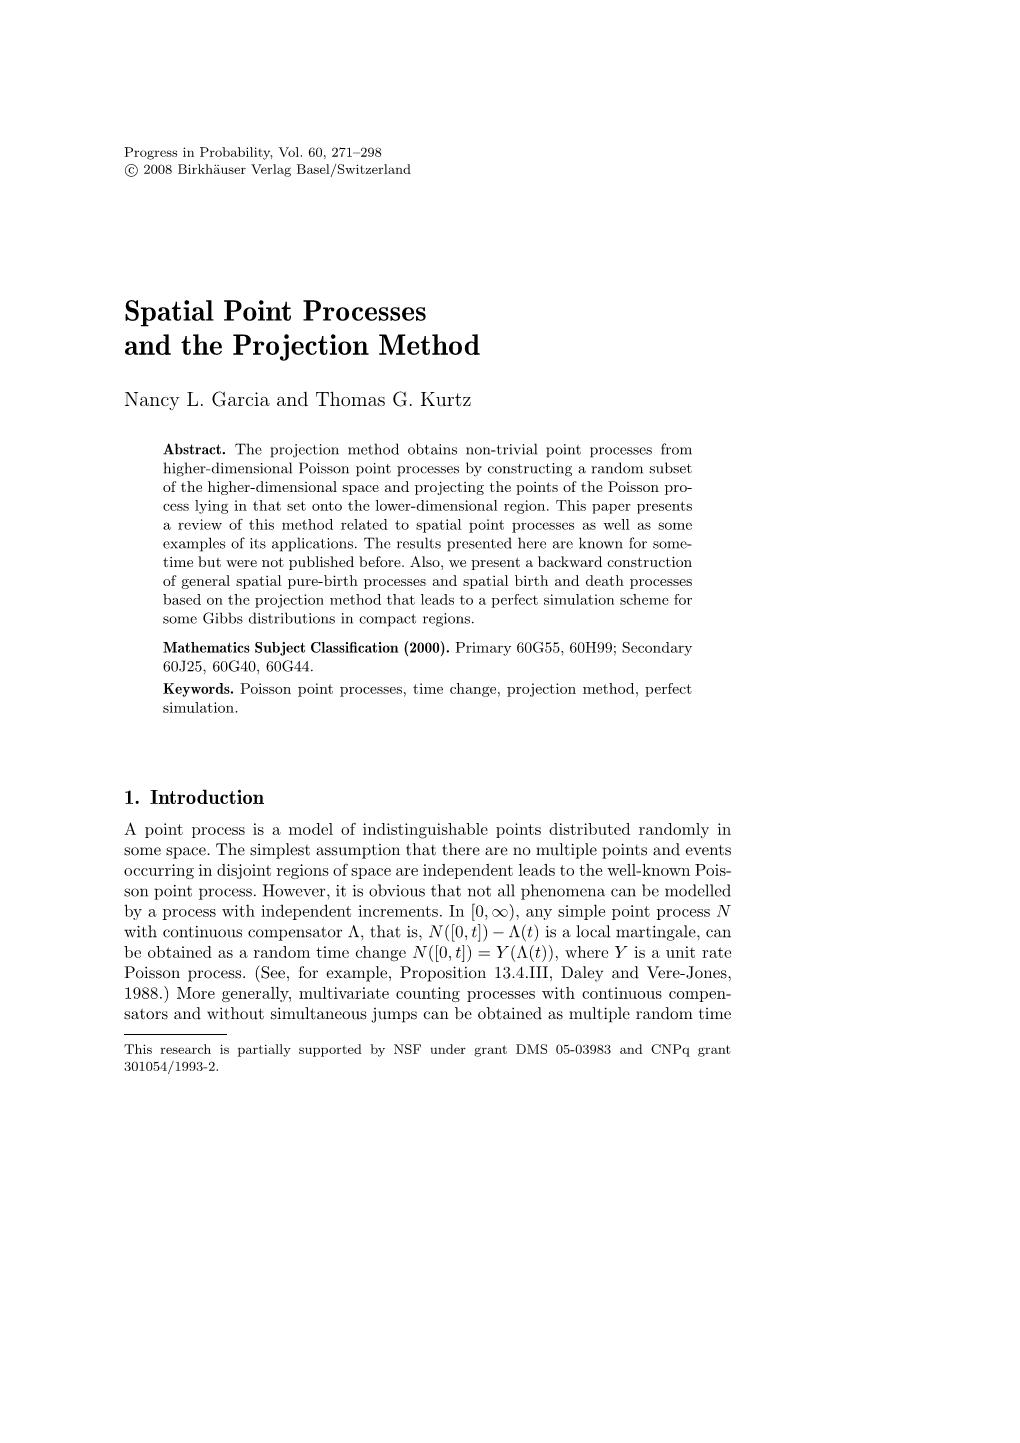 Spatial Point Processes and the Projection Method